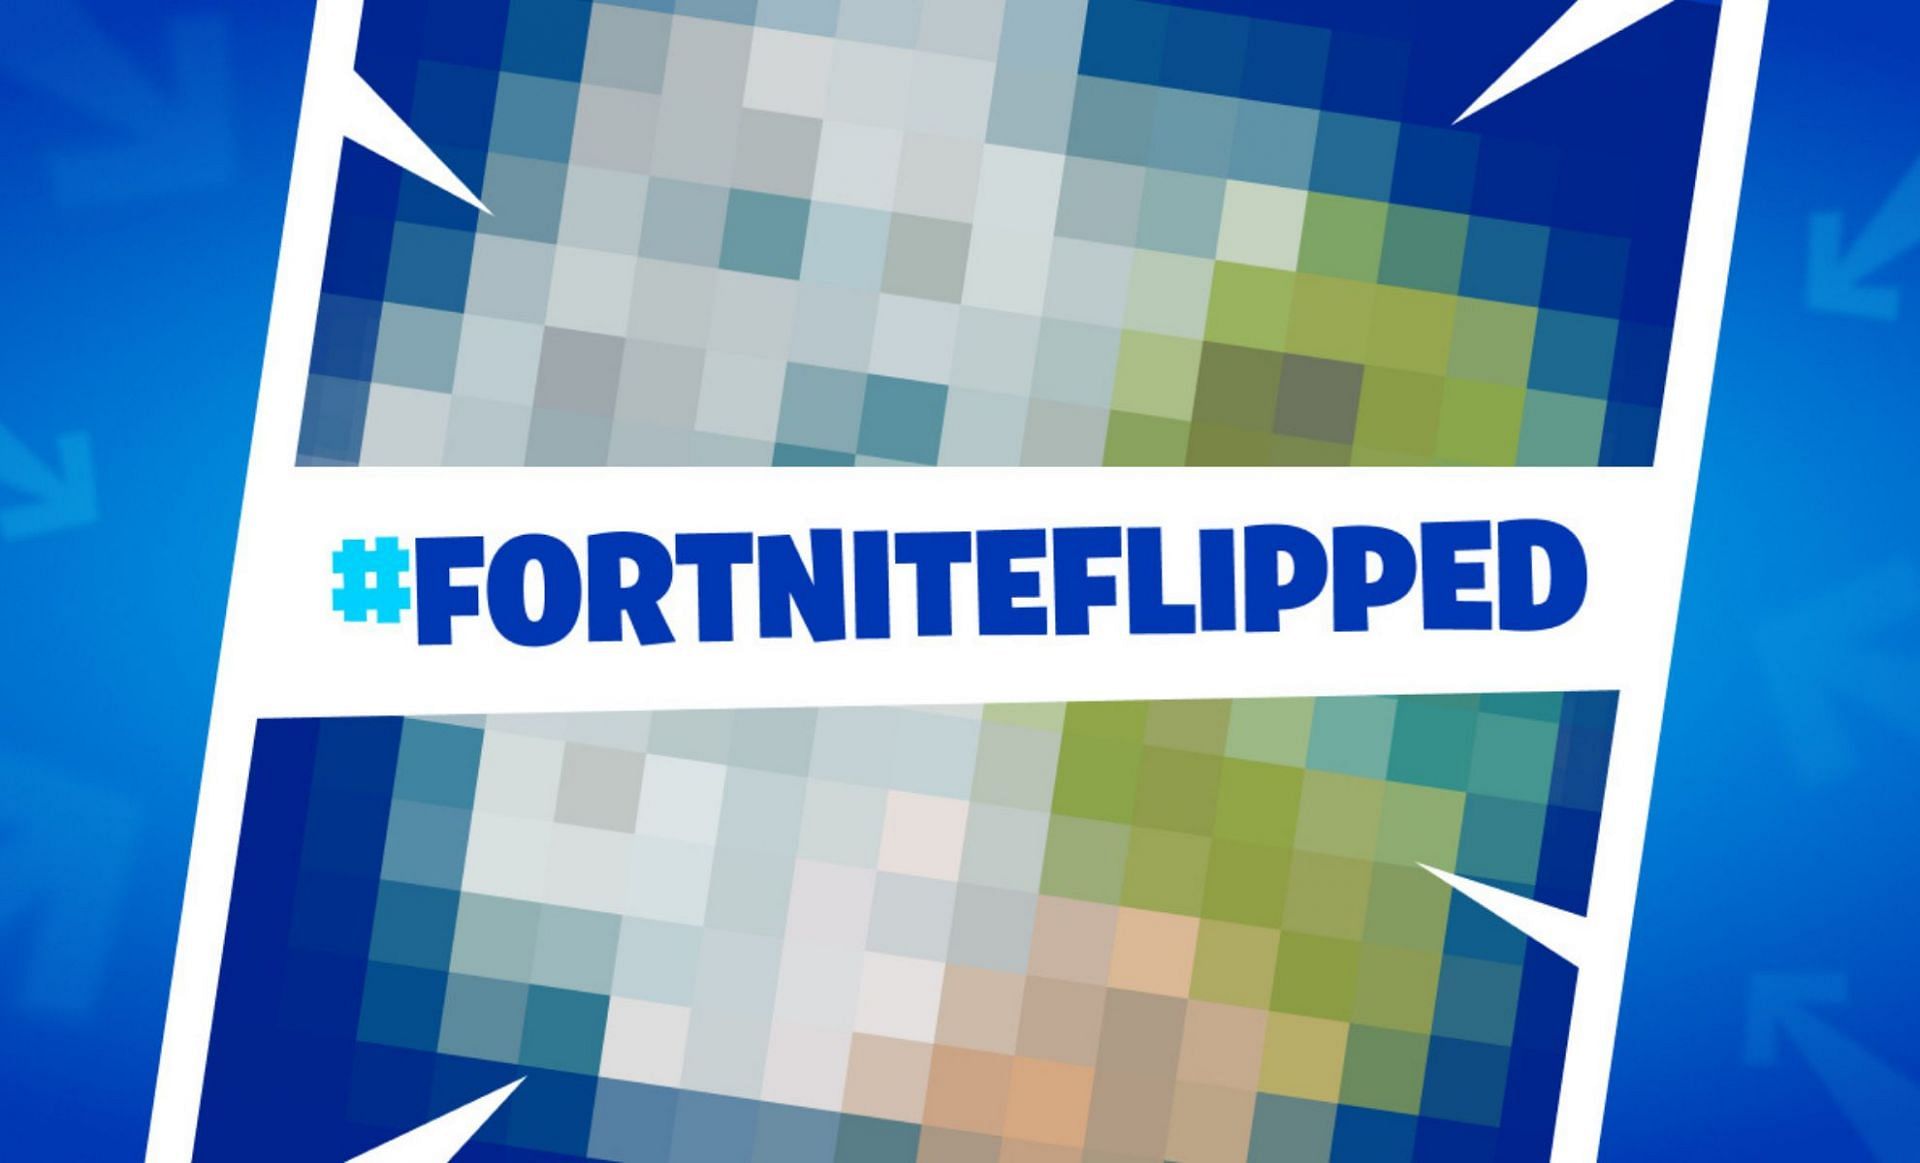 The Flipped theme was teased early (Image via Fortnite on Twitter)